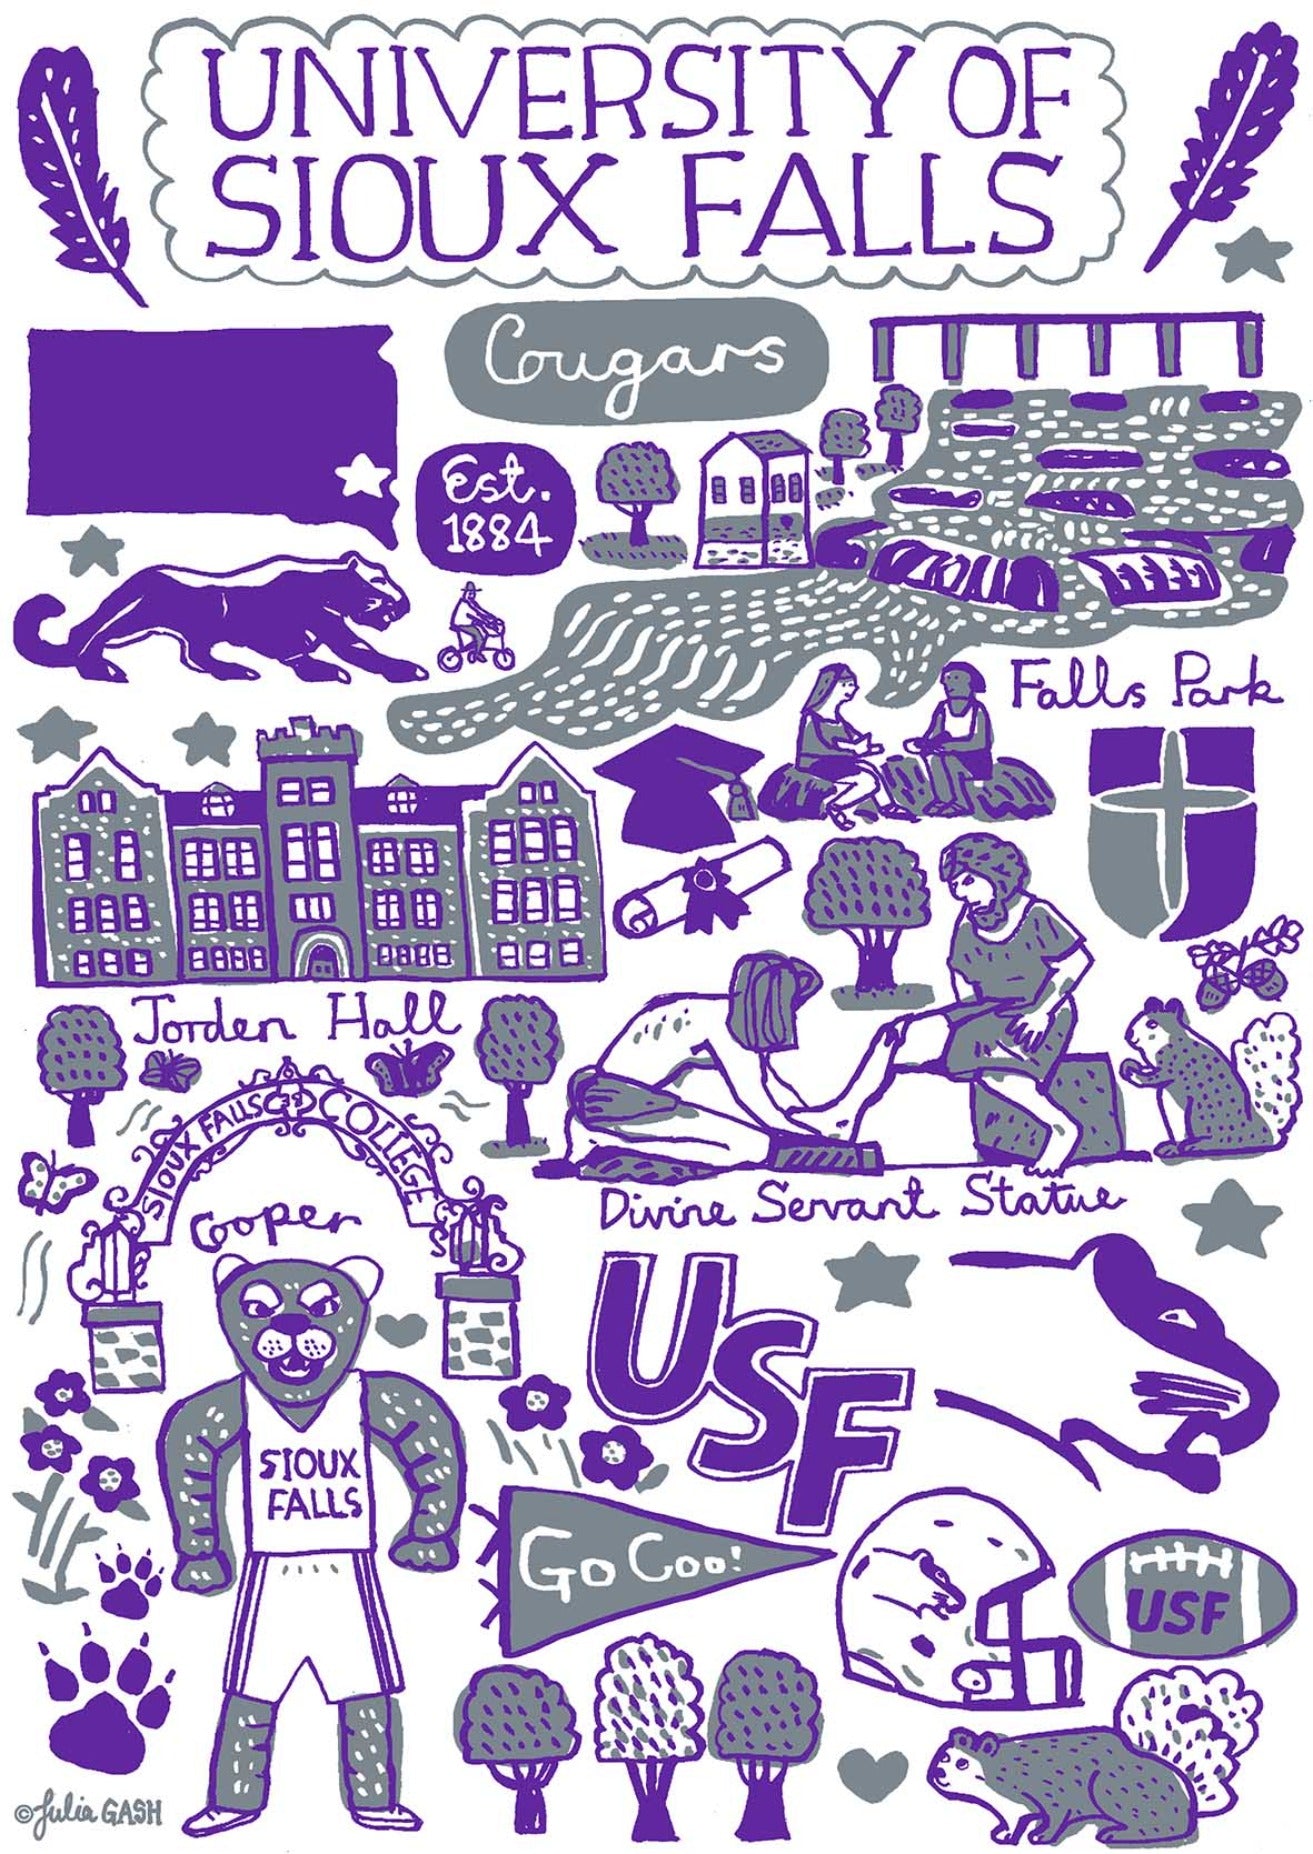 University of Sioux Falls by Julia Gash